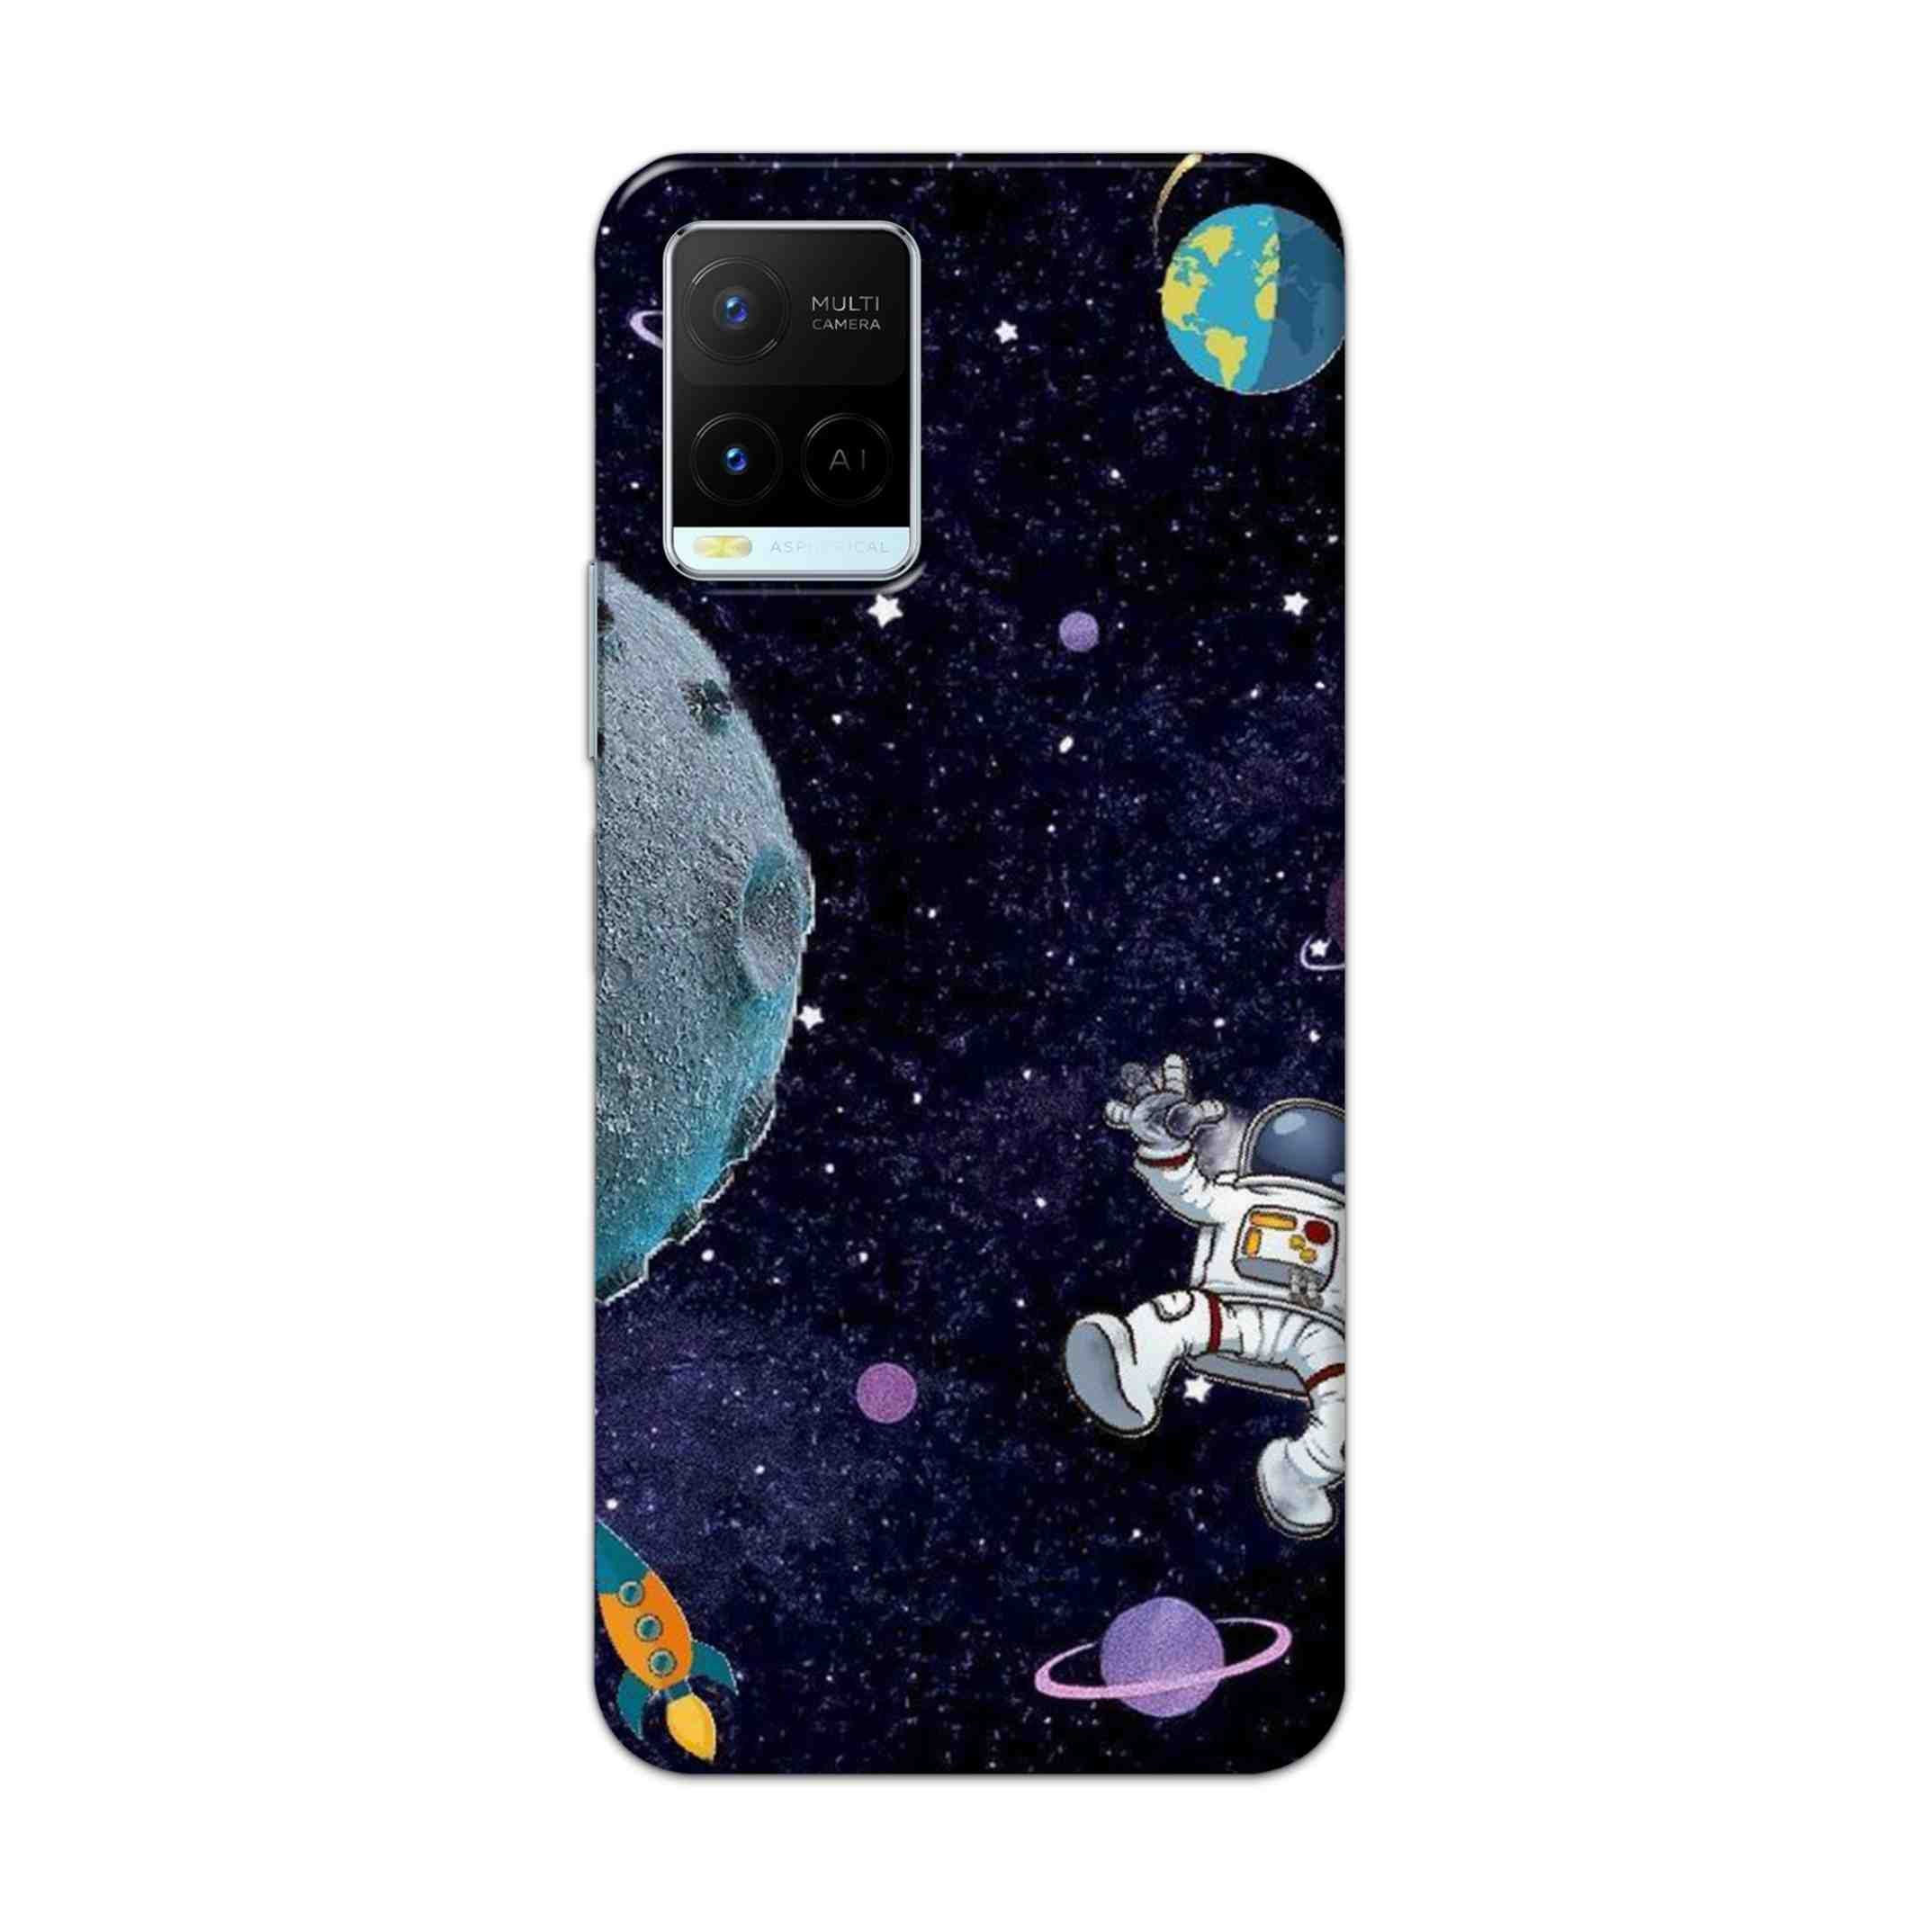 Buy Space Hard Back Mobile Phone Case Cover For Vivo Y21 2021 Online